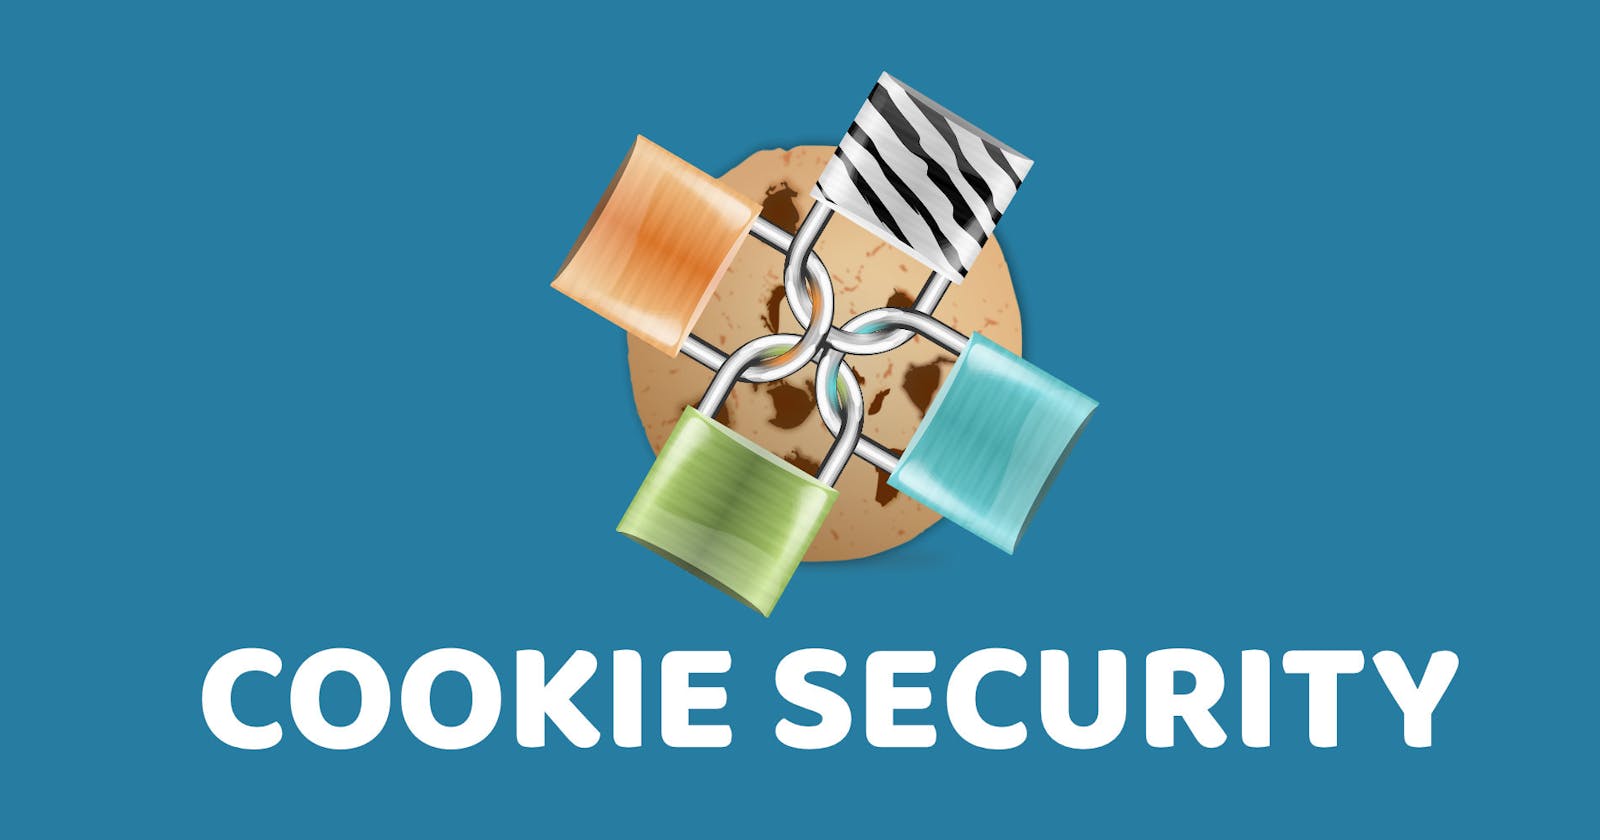 Cookie Security: 10 Tips To Protect Your Web Application